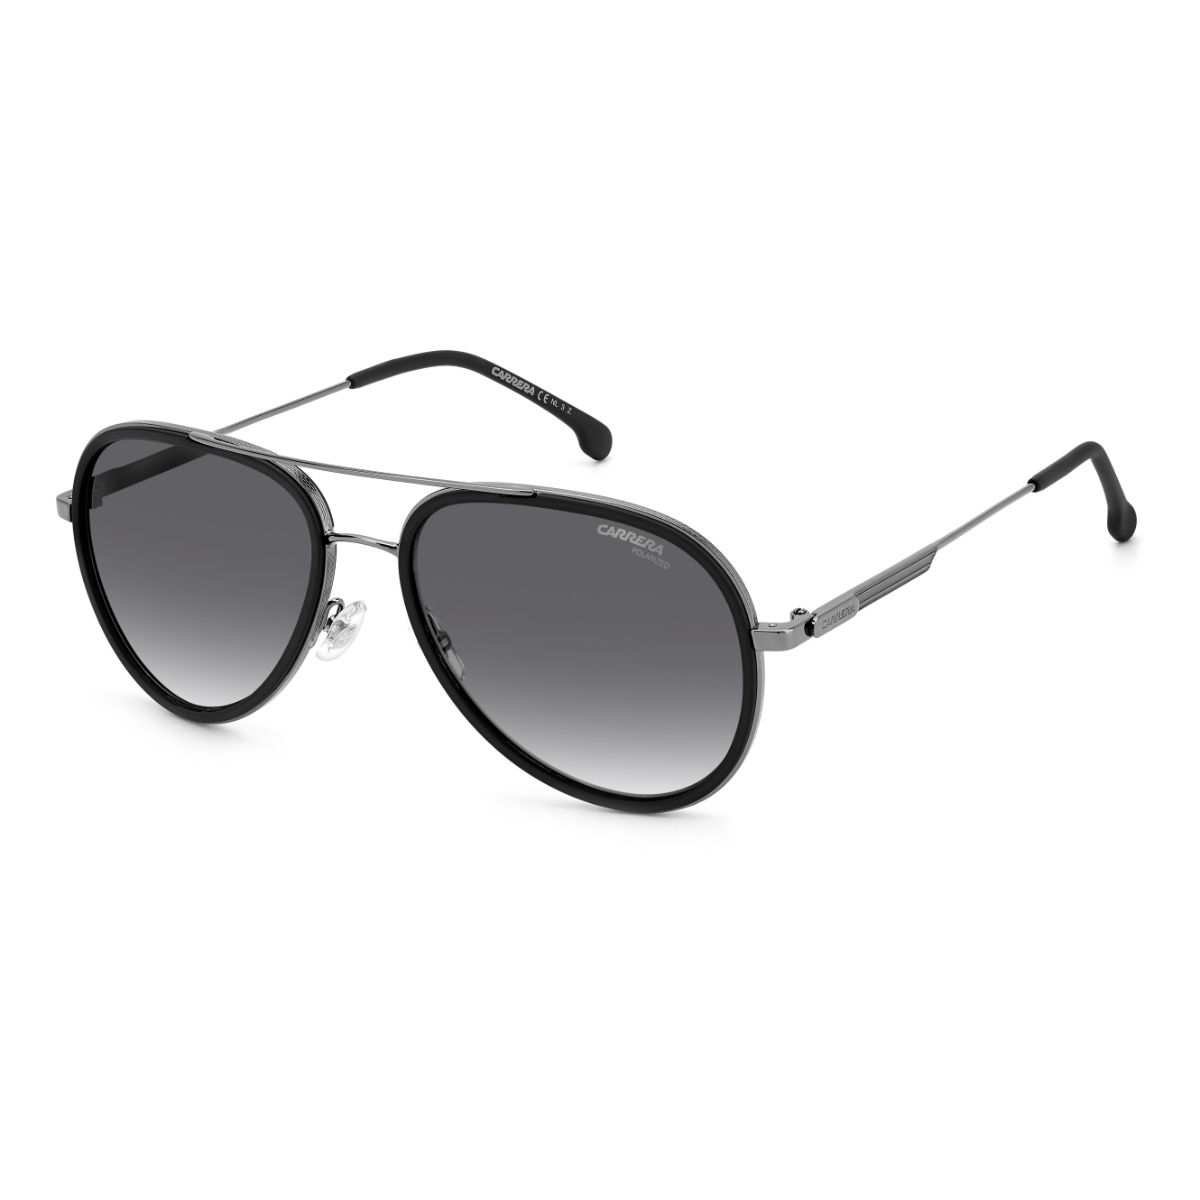 Carrera Sunglasses Grey Shaded Polarized Lens Pilot Sunglass Matte Black  Frame: Buy Carrera Sunglasses Grey Shaded Polarized Lens Pilot Sunglass  Matte Black Frame Online at Best Price in India | Nykaa